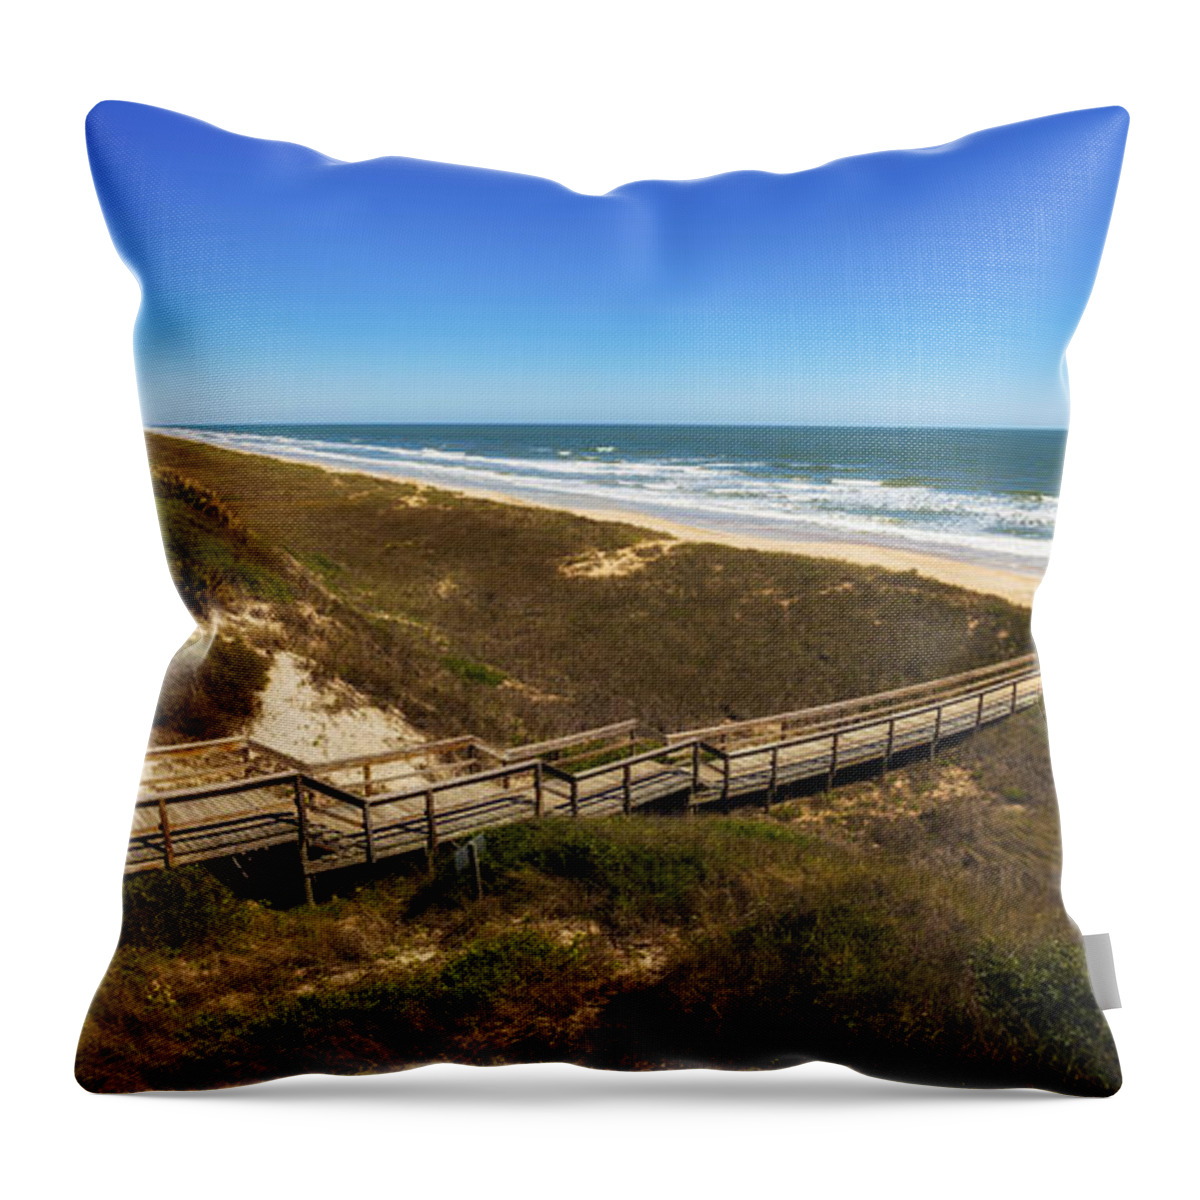 Atlantic Ocean Throw Pillow featuring the photograph Ponte Vedra Beach #8 by Raul Rodriguez